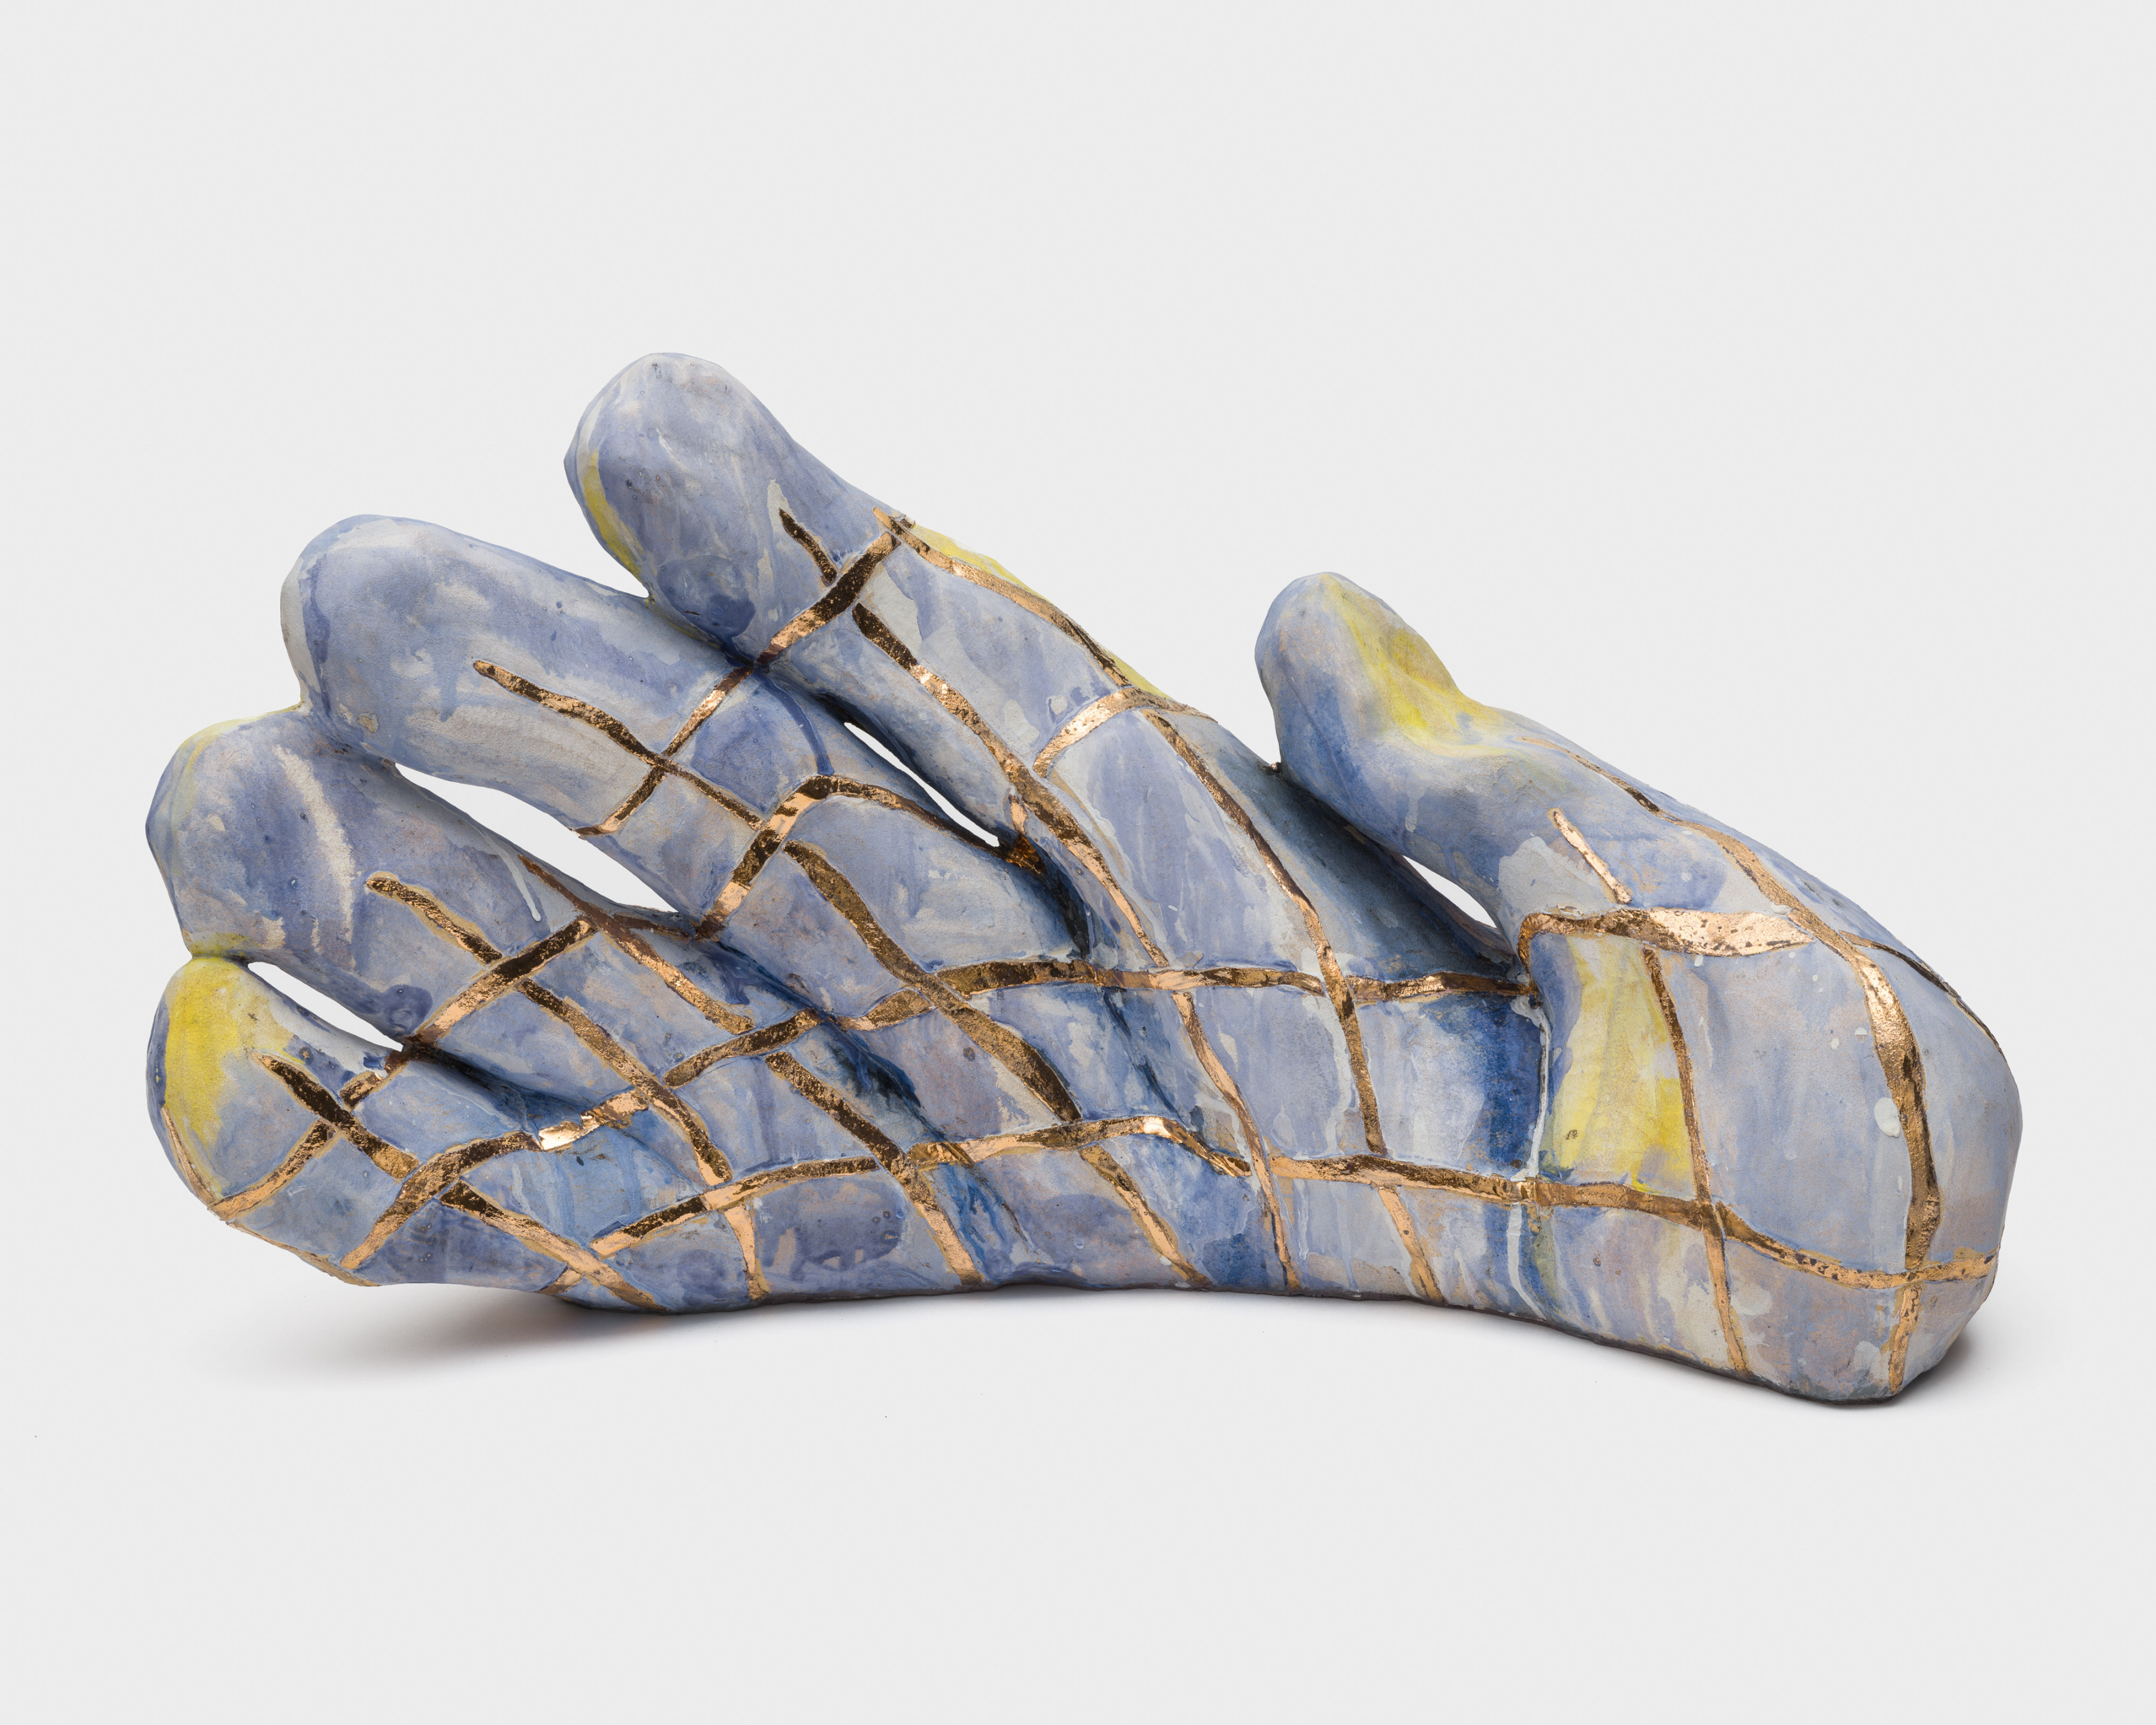 A blue and yellow ceramic sculpture of a hand covered in a golden grid with the fingers extended towards the sky.